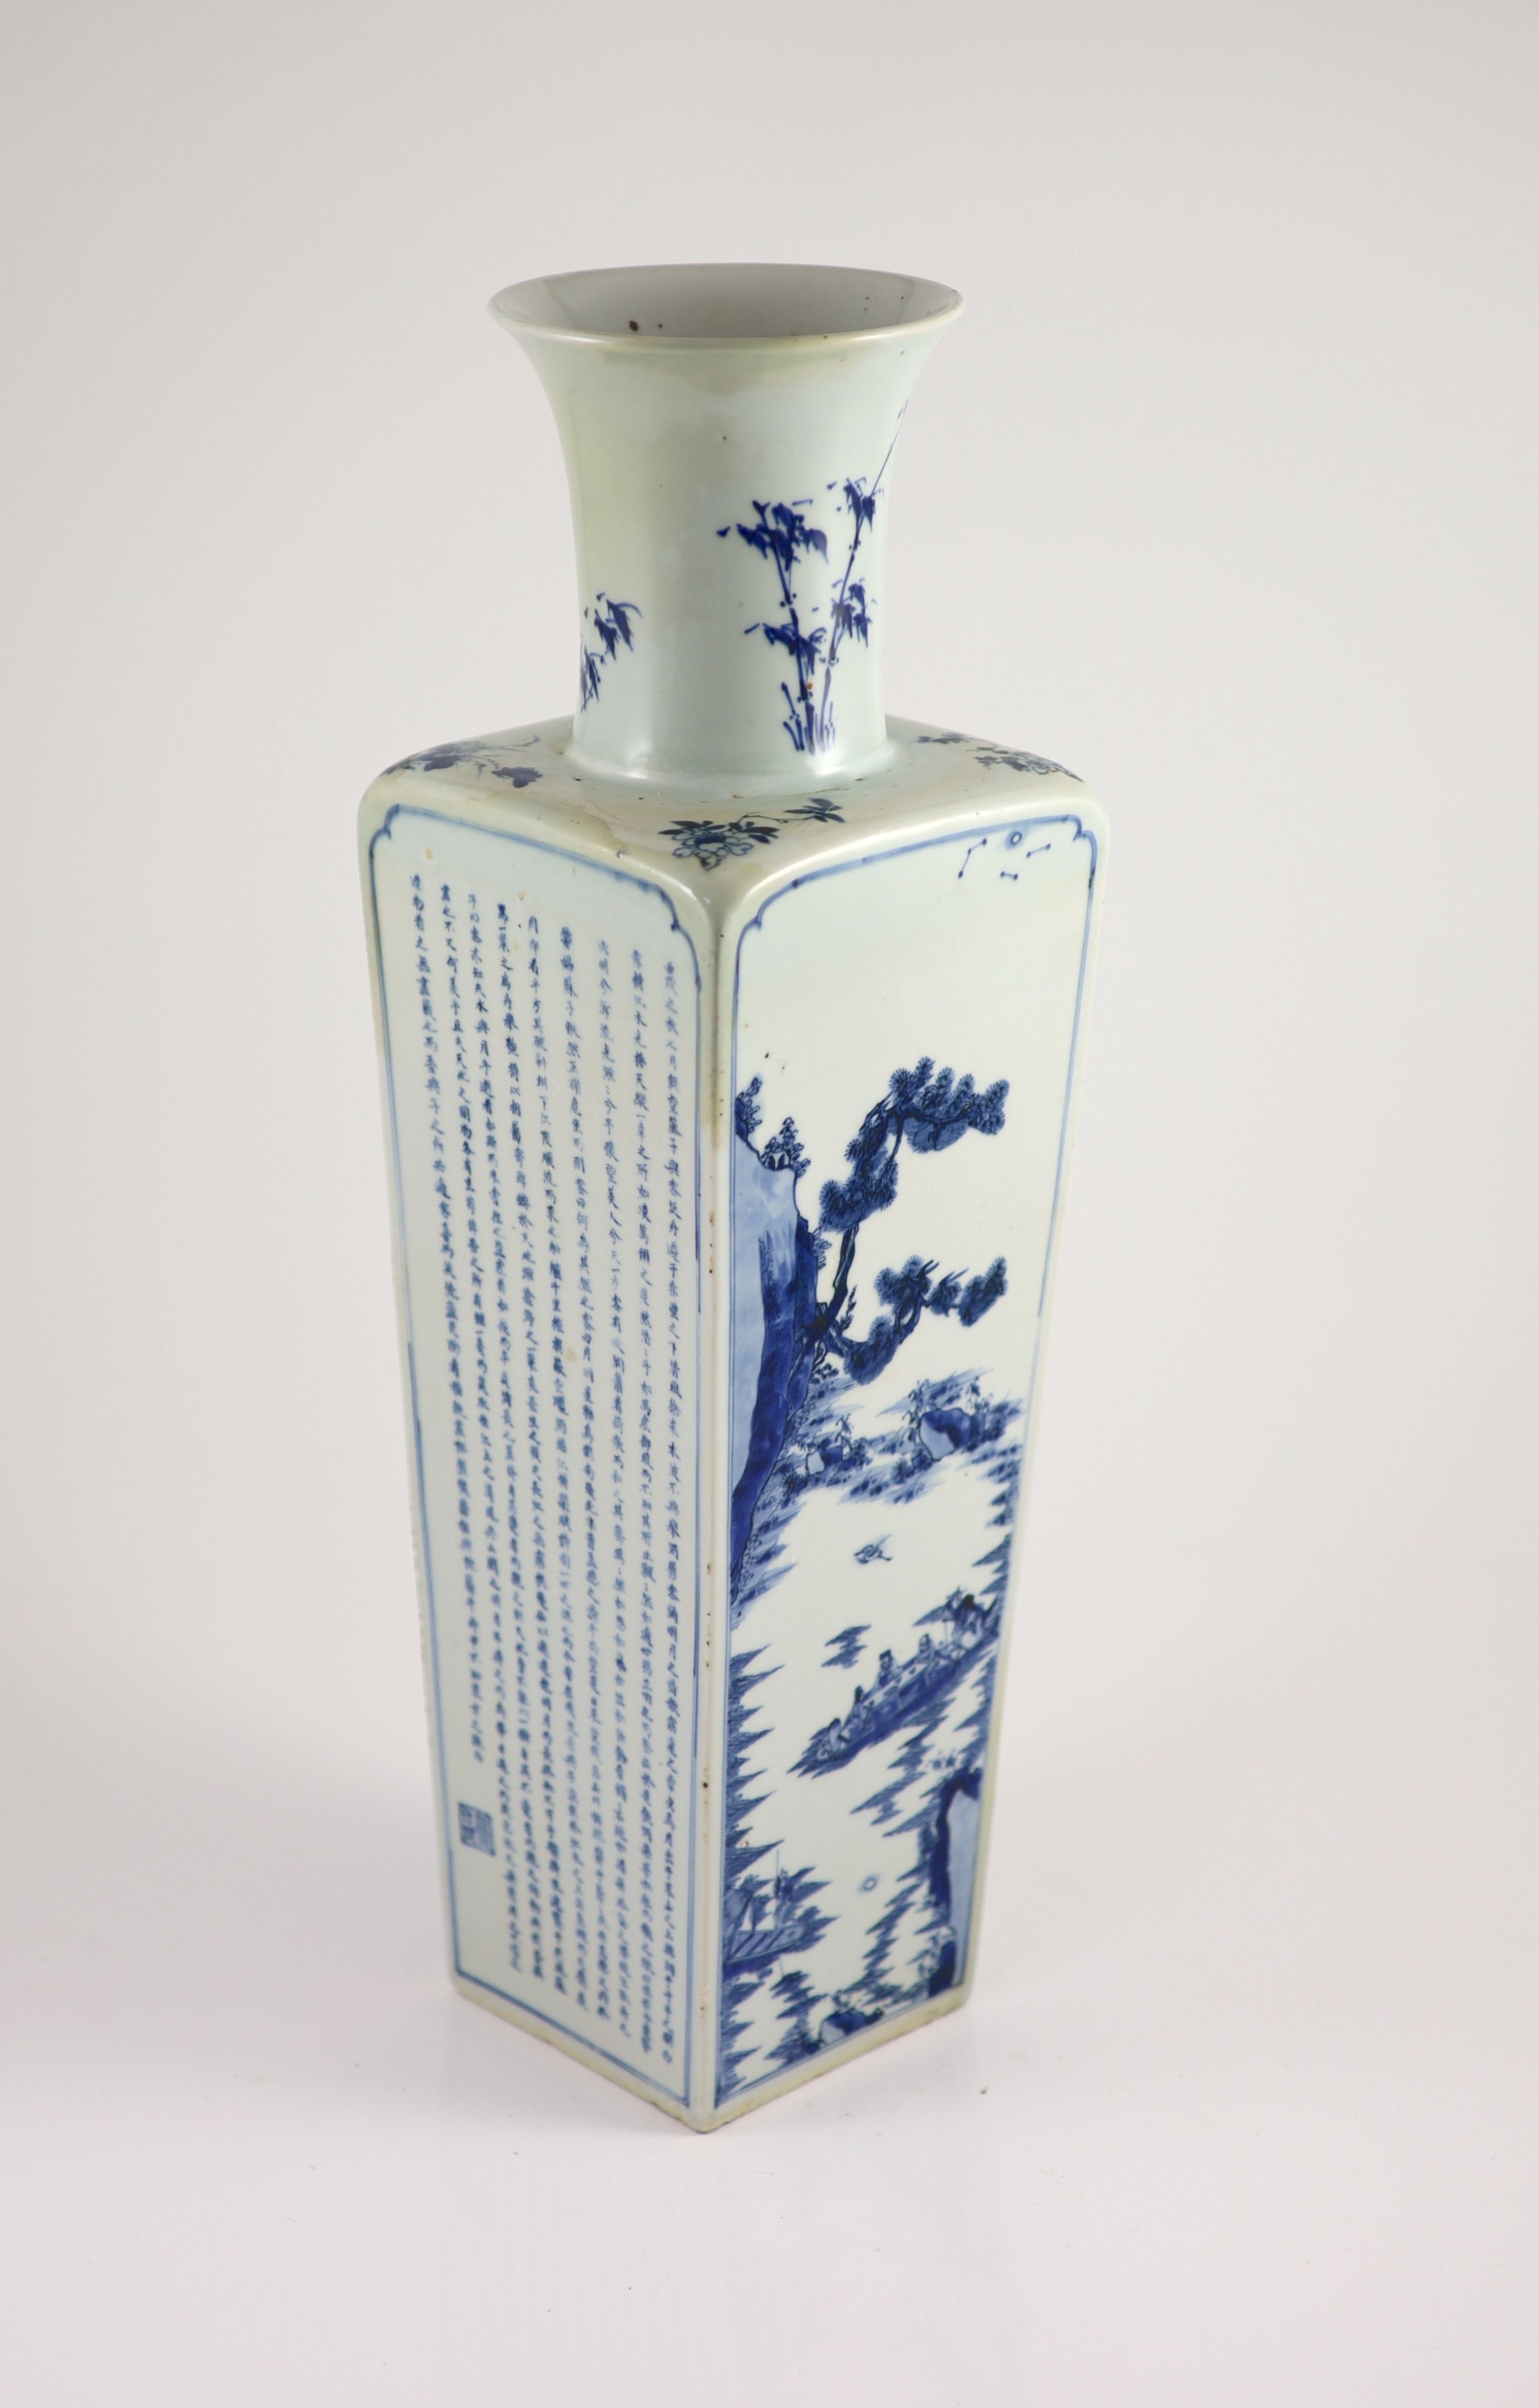 A large Chinese blue and white inscribed vase, late 19th/early 20th century, 49.5cm high, some restoration